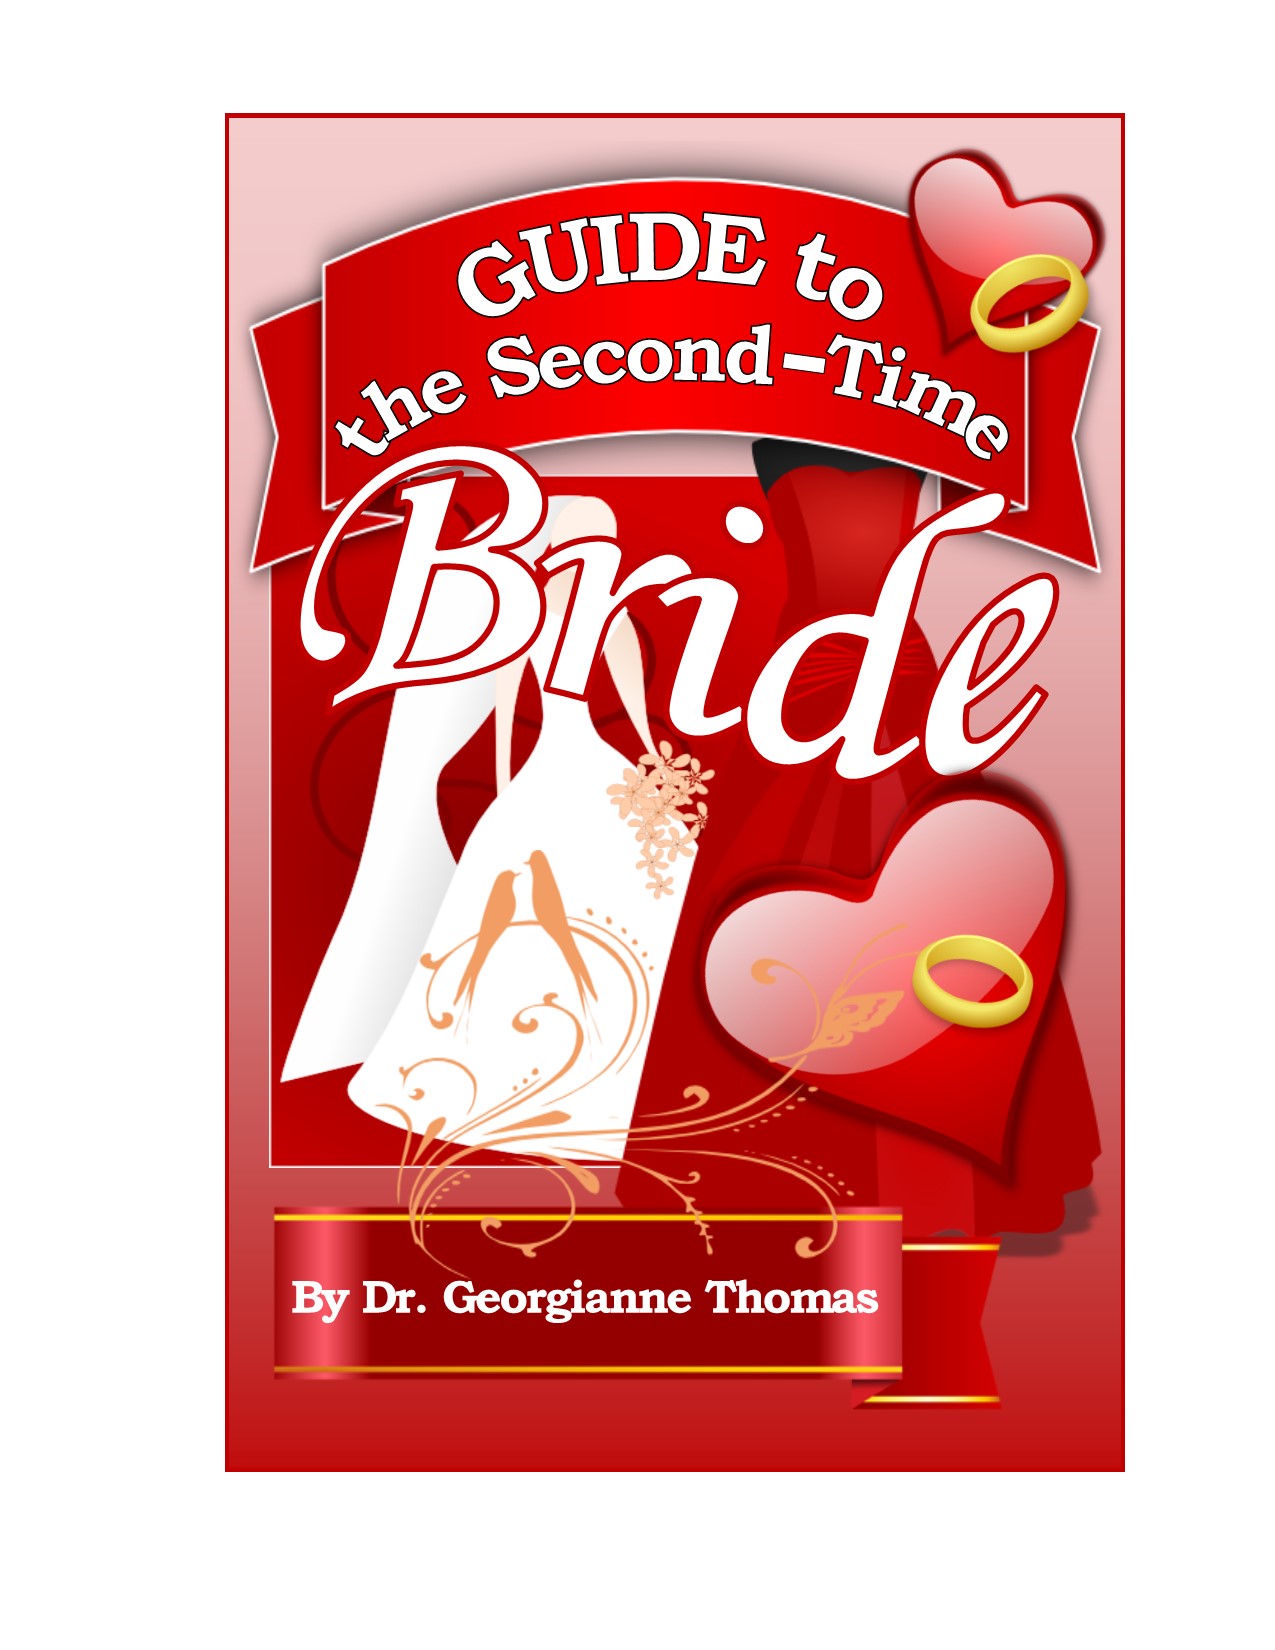 Guide to the Second-Time Bride by Dr. Georgianne Thomas